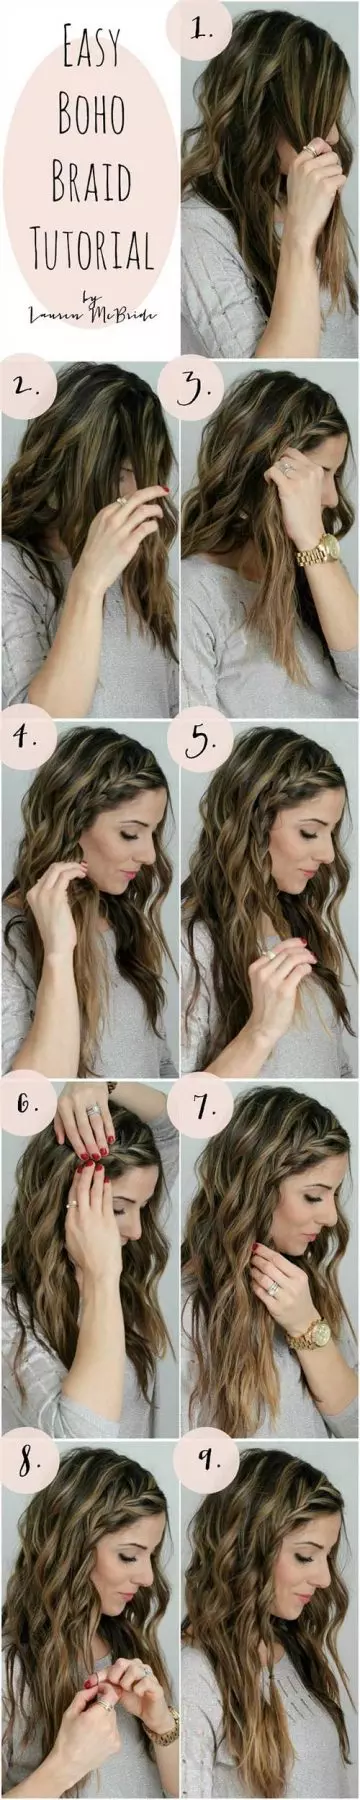 Easy boho braid hairstyle tutorial for girls with long hair